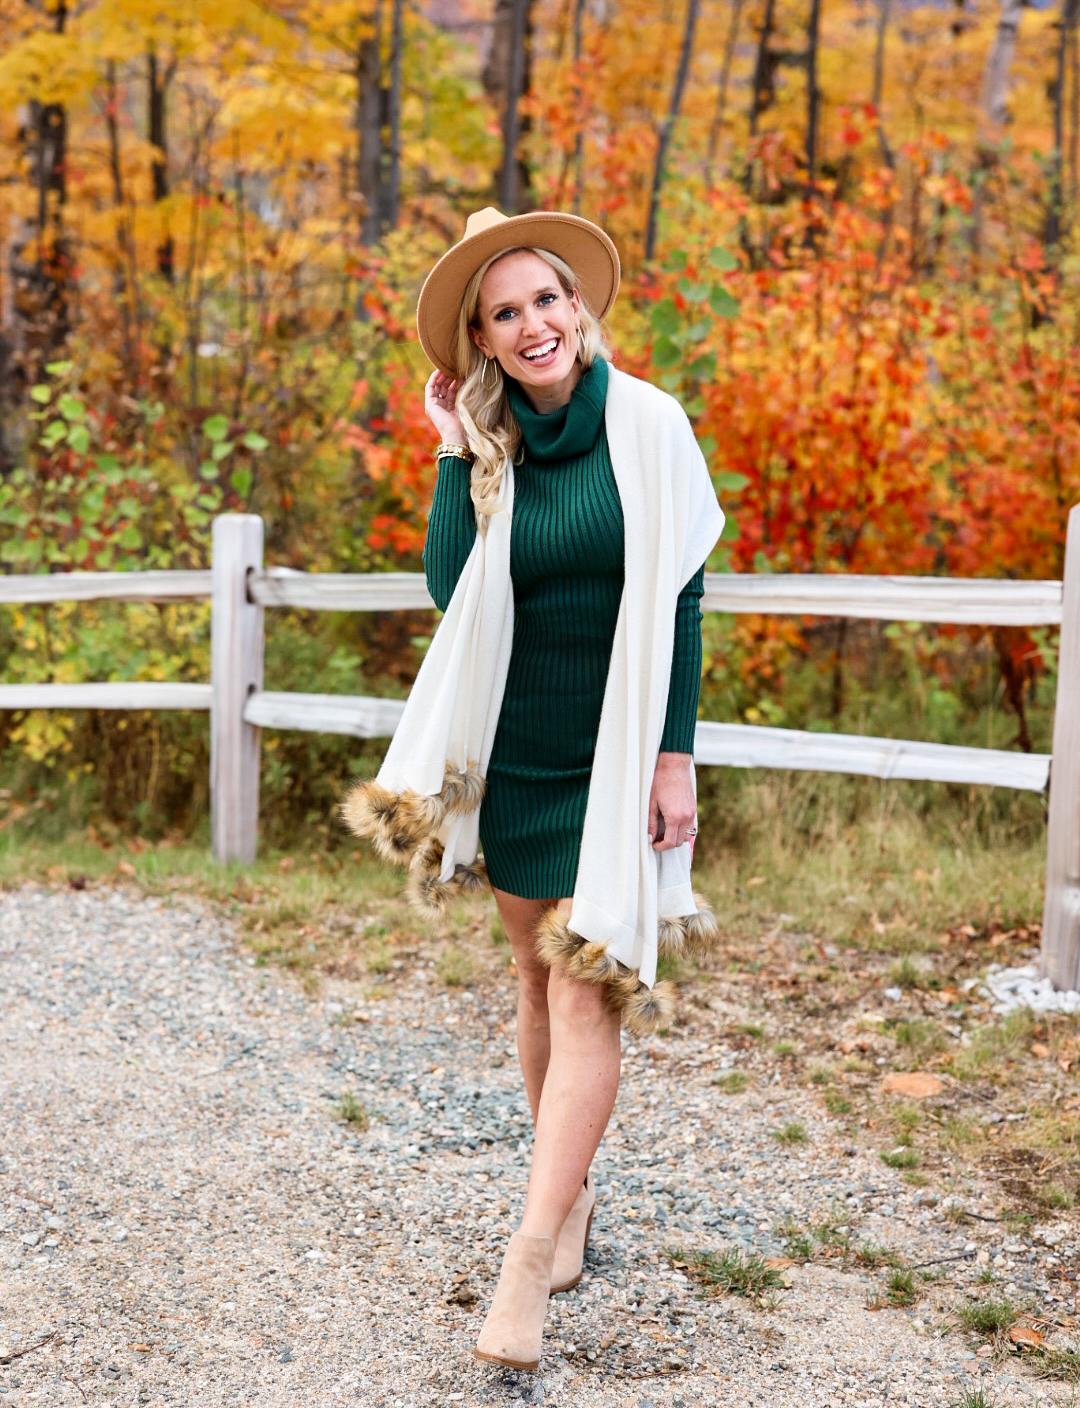 12 Thanksgiving Outfit Ideas | Affordable Holiday Styles | Sweater dress